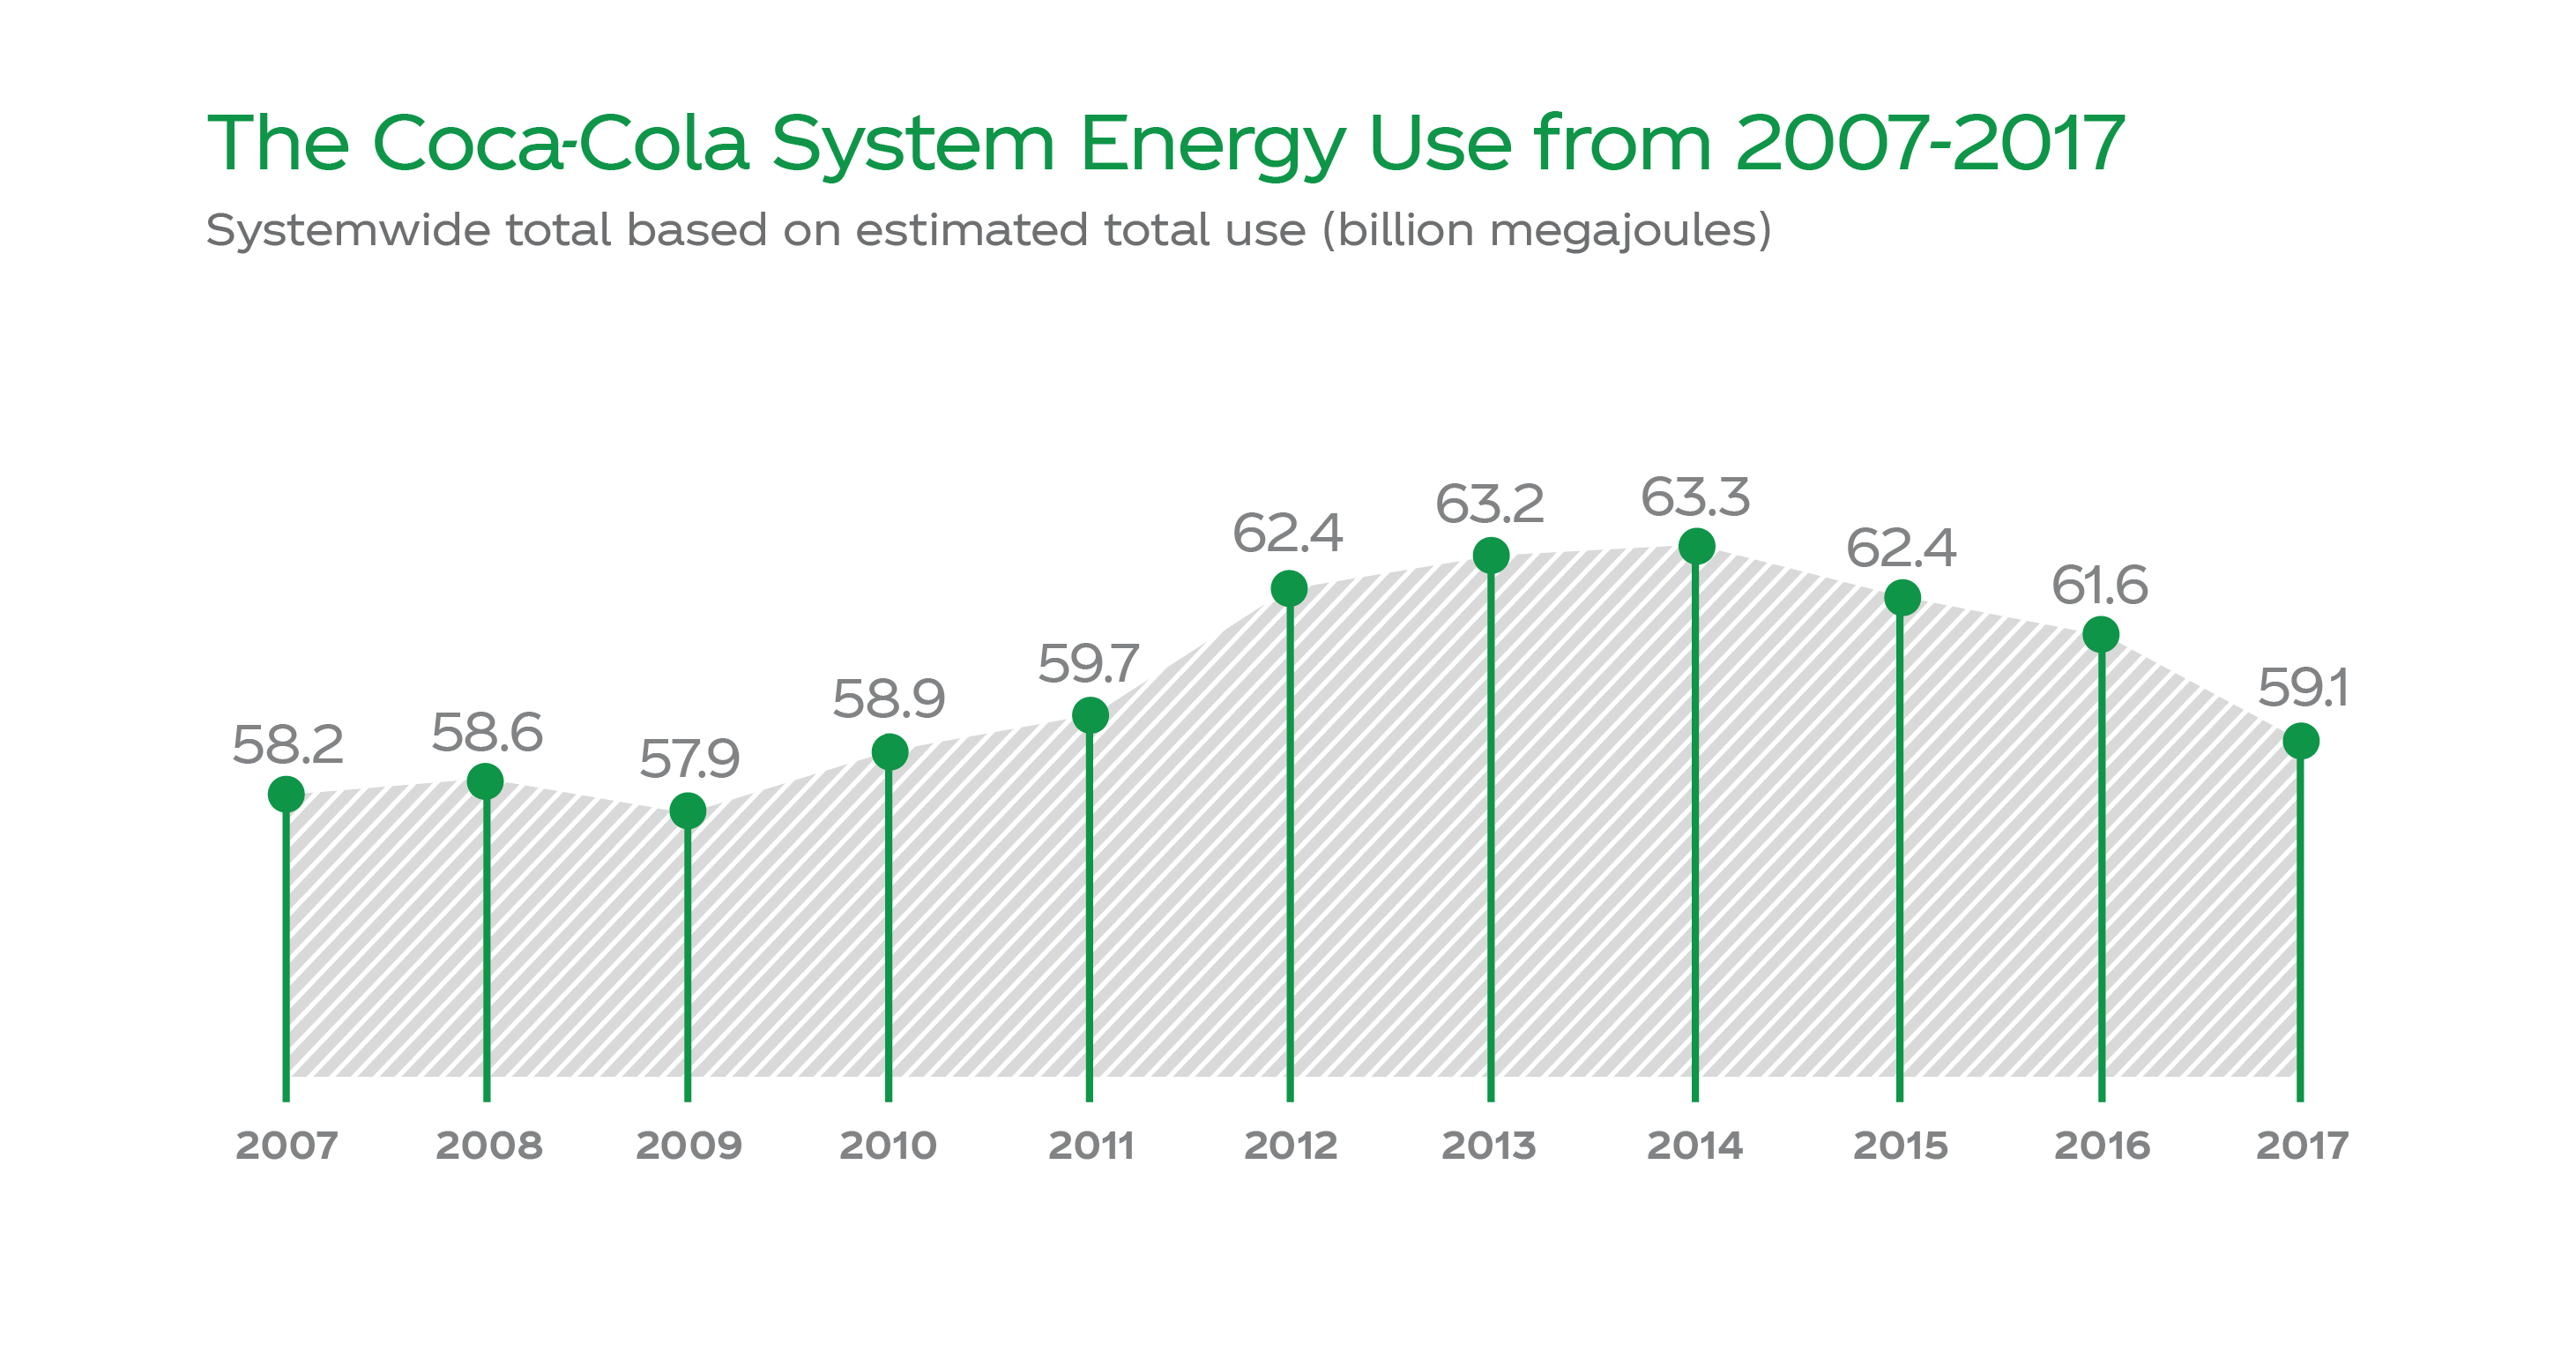 The Coca-Cola System Energy Use from 2007-2017